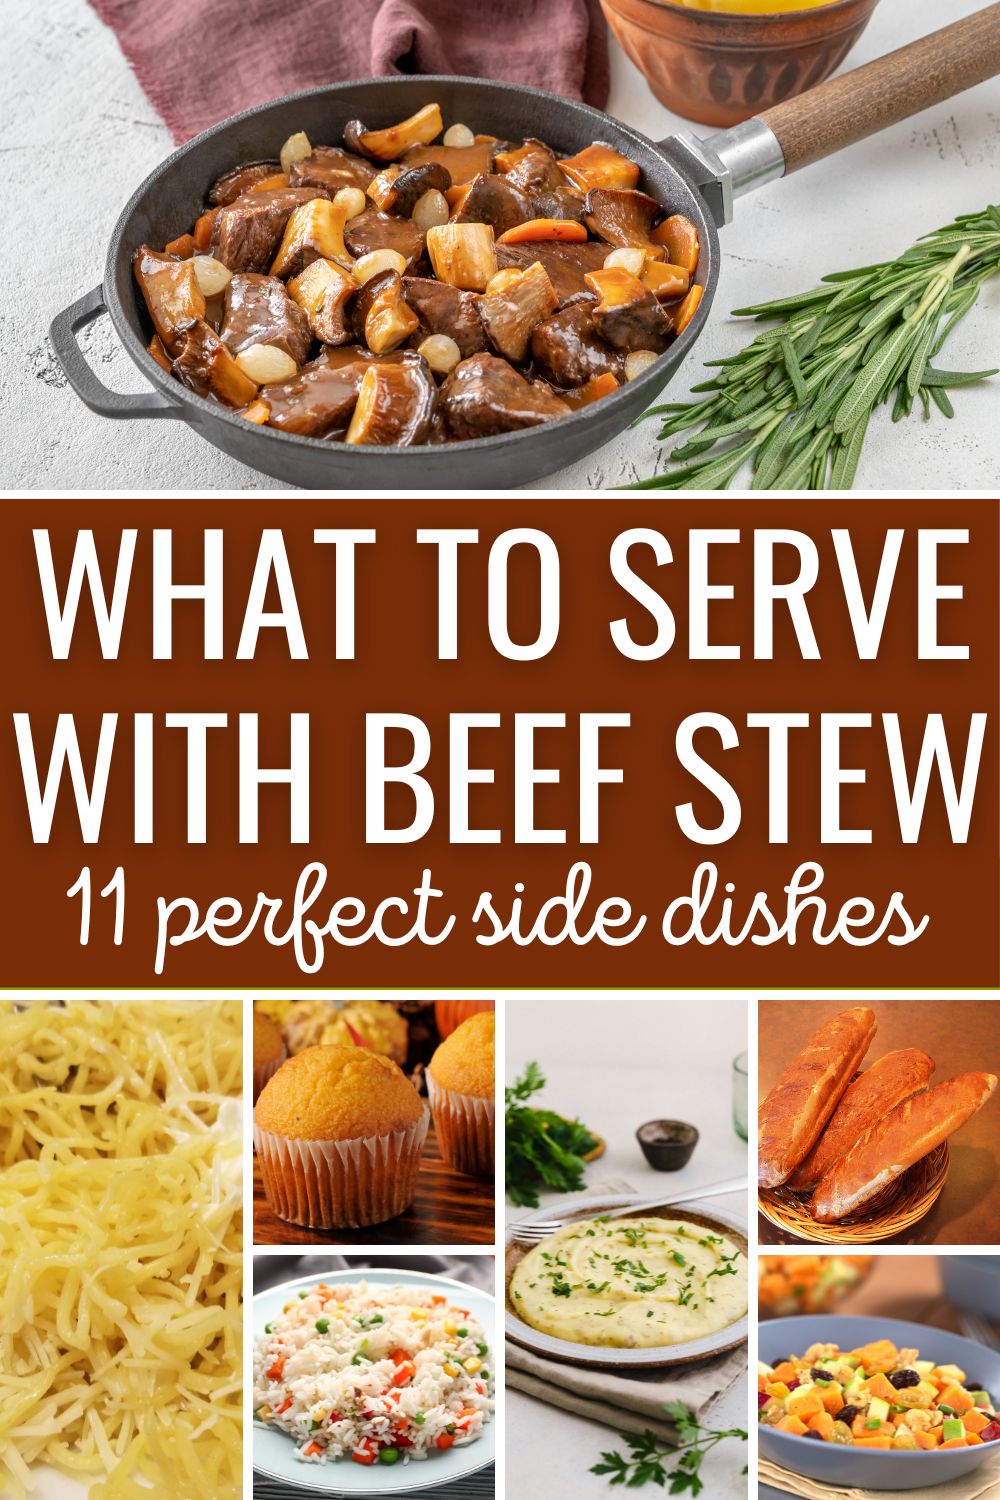 What to serve with beef stew - 11 perfect side dishes.